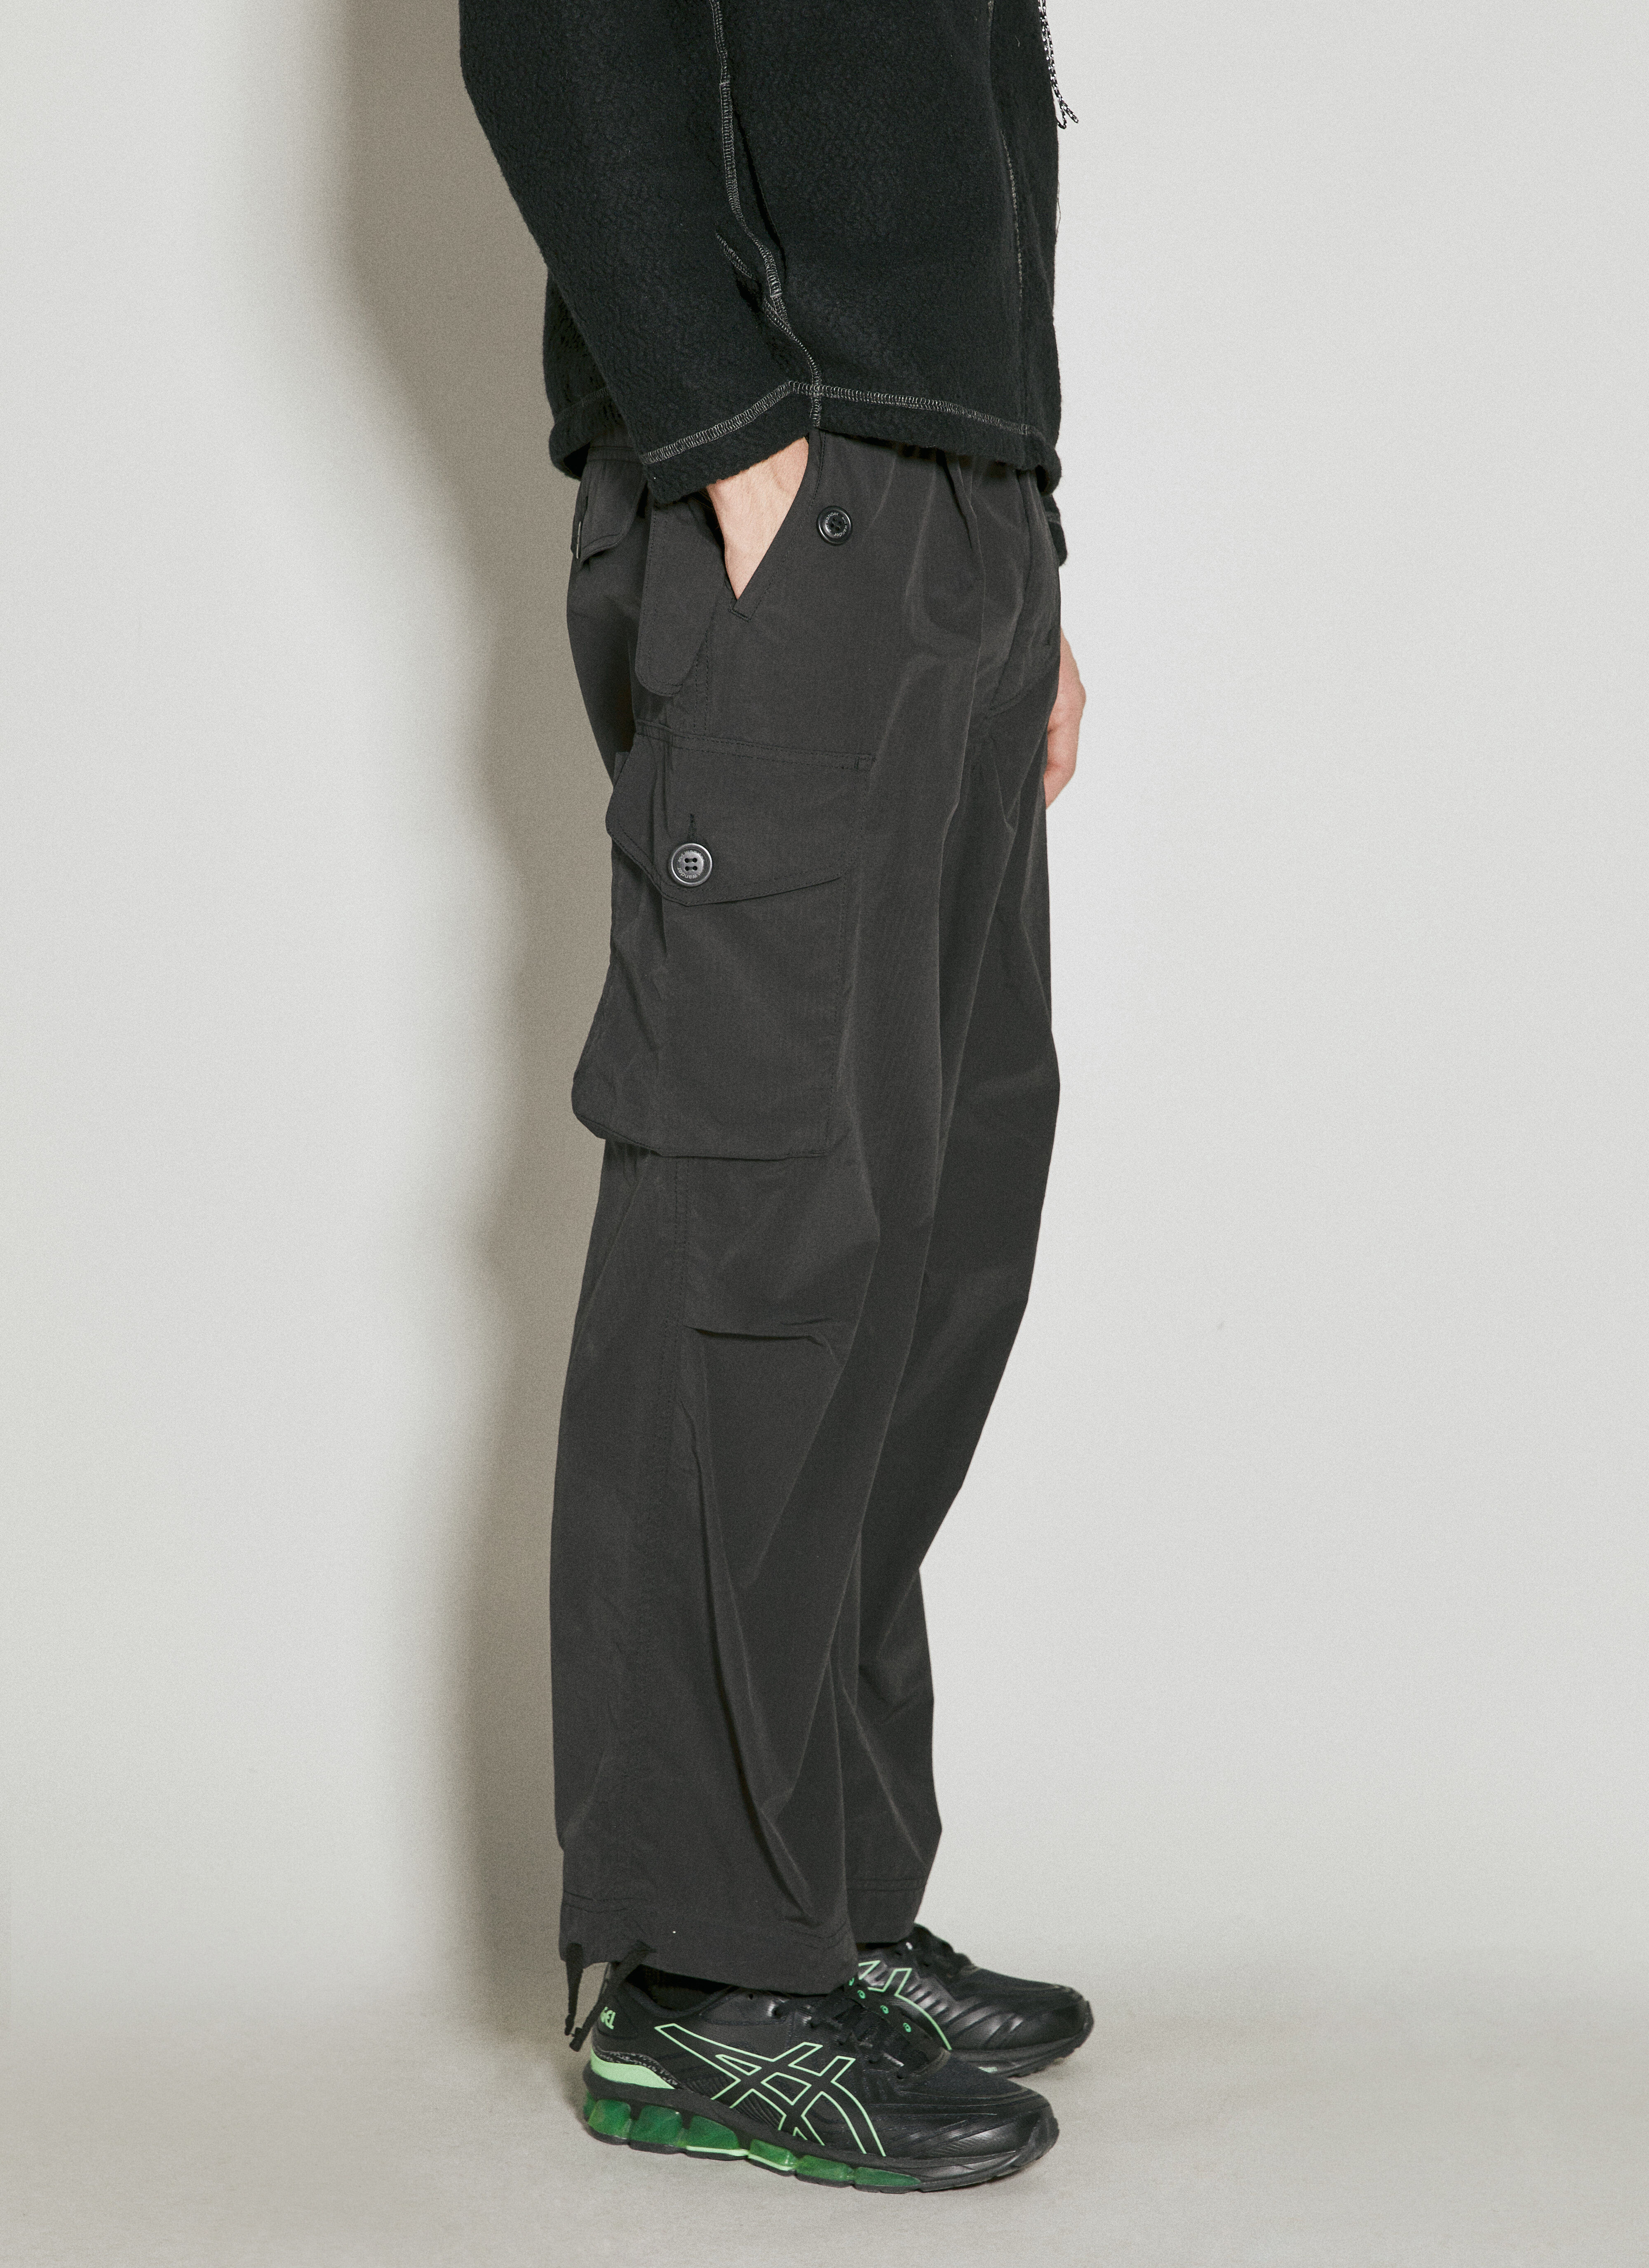 COLLUSION oversized cargo pants in black | ASOS